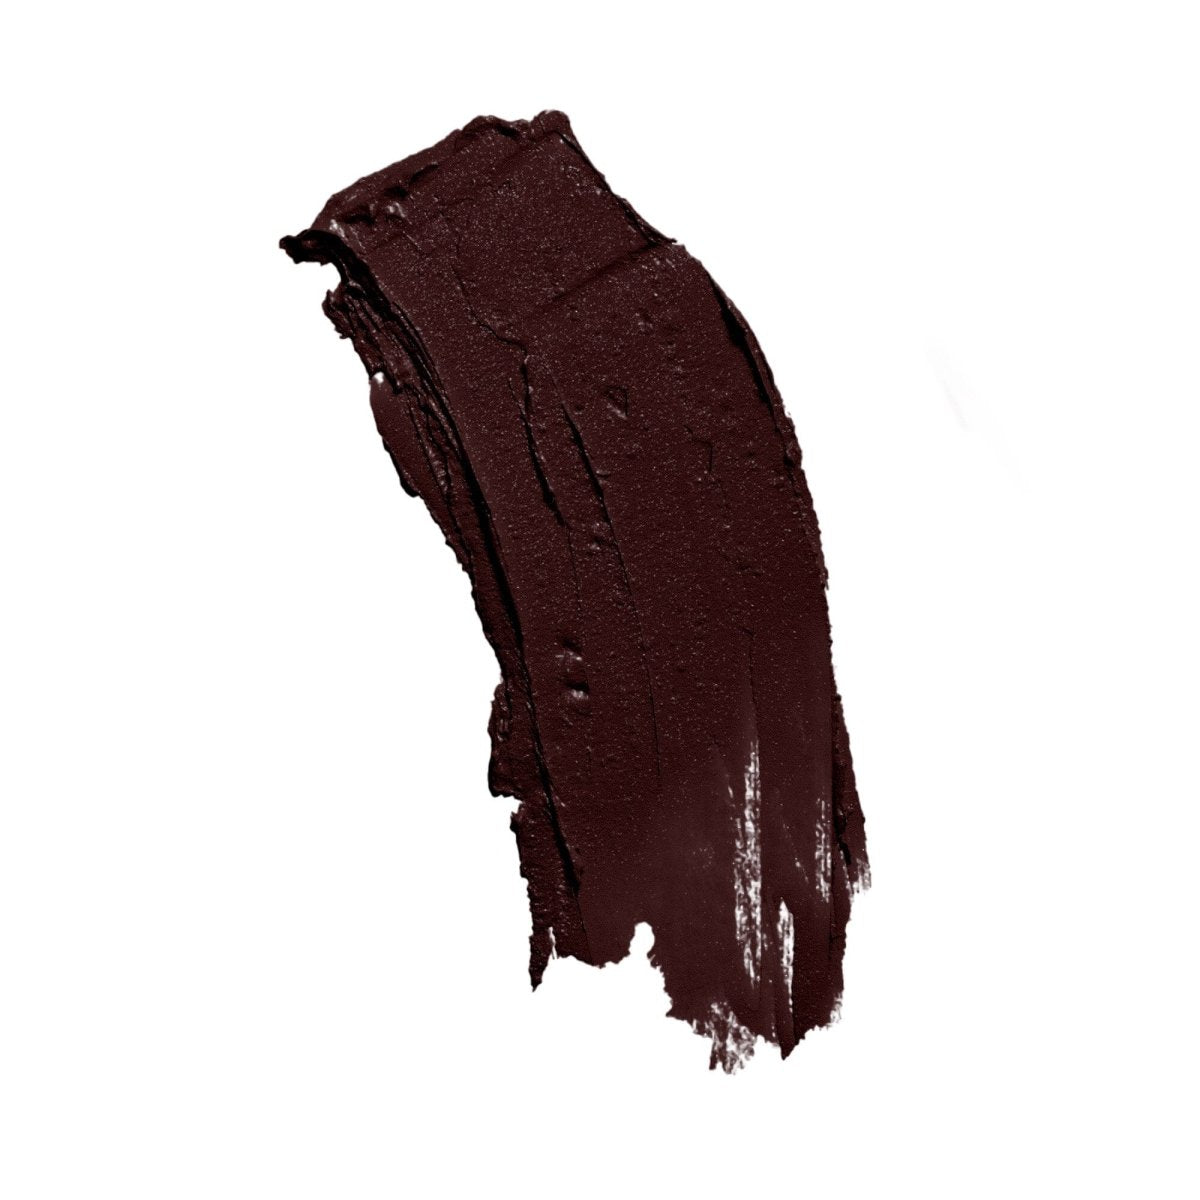 Ethical beauty matte dark brown chocolate lipstick displayed on a white background